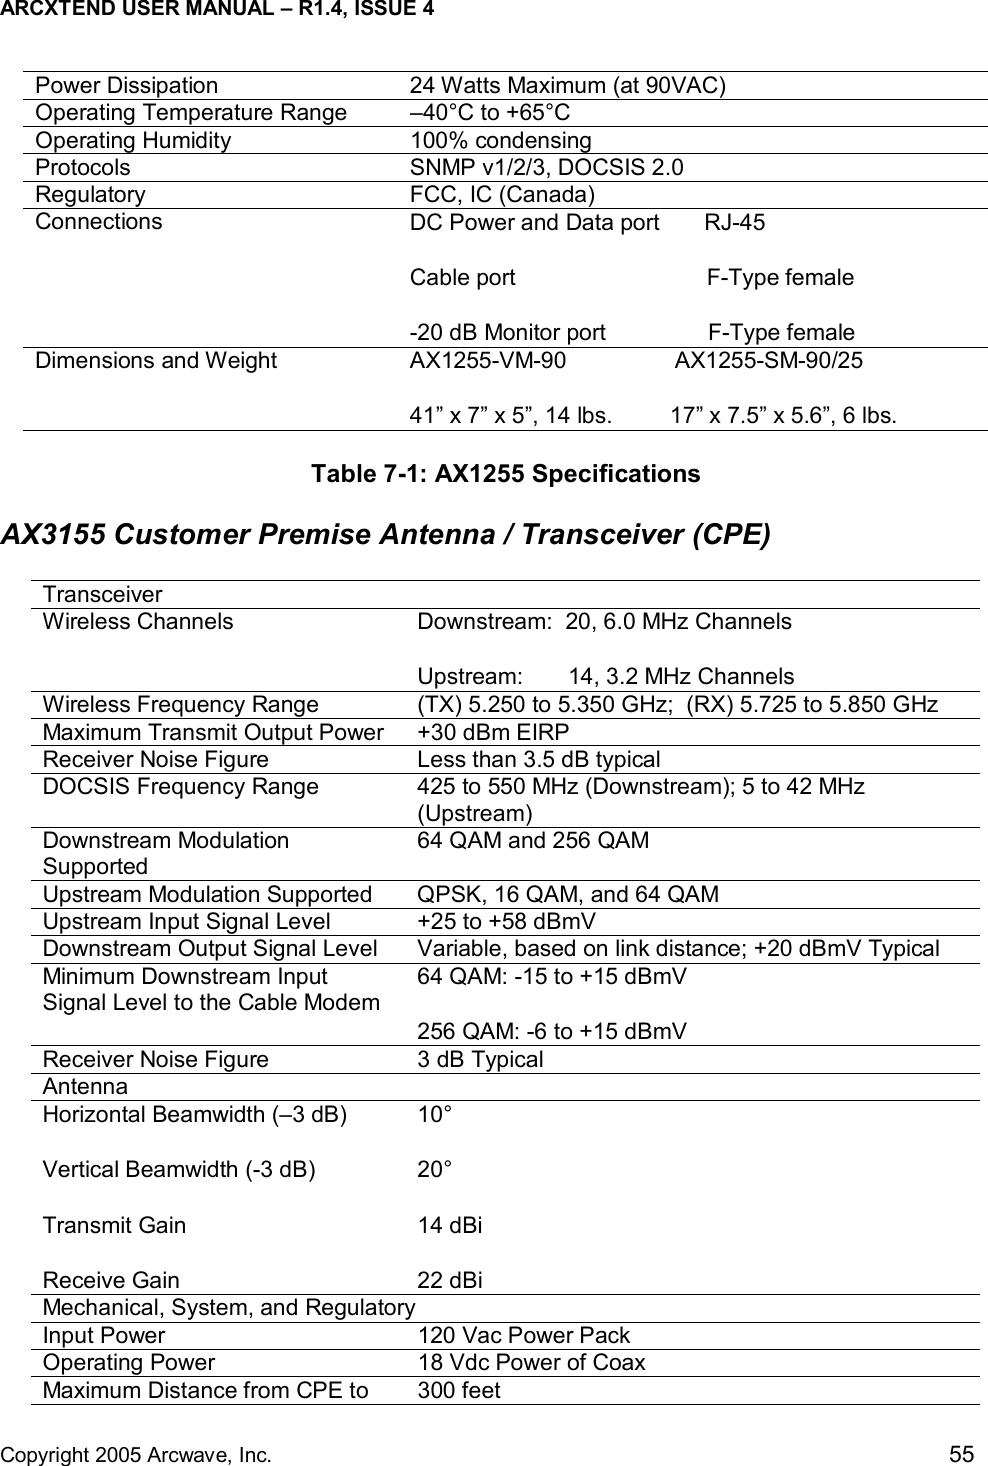 ARCXTEND USER MANUAL – R1.4, ISSUE 4  Copyright 2005 Arcwave, Inc.    55 Power Dissipation  24 Watts Maximum (at 90VAC) Operating Temperature Range  –40°C to +65°C  Operating Humidity     100% condensing Protocols  SNMP v1/2/3, DOCSIS 2.0  Regulatory  FCC, IC (Canada) Connections  DC Power and Data port       RJ-45    Cable port                              F-Type female -20 dB Monitor port                F-Type female Dimensions and Weight  AX1255-VM-90                 AX1255-SM-90/25    41” x 7” x 5”, 14 lbs.         17” x 7.5” x 5.6”, 6 lbs. Table 7-1: AX1255 Specifications AX3155 Customer Premise Antenna / Transceiver (CPE) Transceiver Wireless Channels  Downstream:  20, 6.0 MHz Channels Upstream:       14, 3.2 MHz Channels Wireless Frequency Range     (TX) 5.250 to 5.350 GHz;  (RX) 5.725 to 5.850 GHz Maximum Transmit Output Power  +30 dBm EIRP  Receiver Noise Figure  Less than 3.5 dB typical DOCSIS Frequency Range  425 to 550 MHz (Downstream); 5 to 42 MHz (Upstream) Downstream Modulation Supported   64 QAM and 256 QAM Upstream Modulation Supported  QPSK, 16 QAM, and 64 QAM Upstream Input Signal Level  +25 to +58 dBmV Downstream Output Signal Level   Variable, based on link distance; +20 dBmV Typical Minimum Downstream Input Signal Level to the Cable Modem 64 QAM: -15 to +15 dBmV 256 QAM: -6 to +15 dBmV Receiver Noise Figure  3 dB Typical Antenna  Horizontal Beamwidth (–3 dB) Vertical Beamwidth (-3 dB) Transmit Gain Receive Gain 10°                                                20°                               14 dBi                    22 dBi                  Mechanical, System, and Regulatory Input Power  120 Vac Power Pack Operating Power  18 Vdc Power of Coax Maximum Distance from CPE to  300 feet 